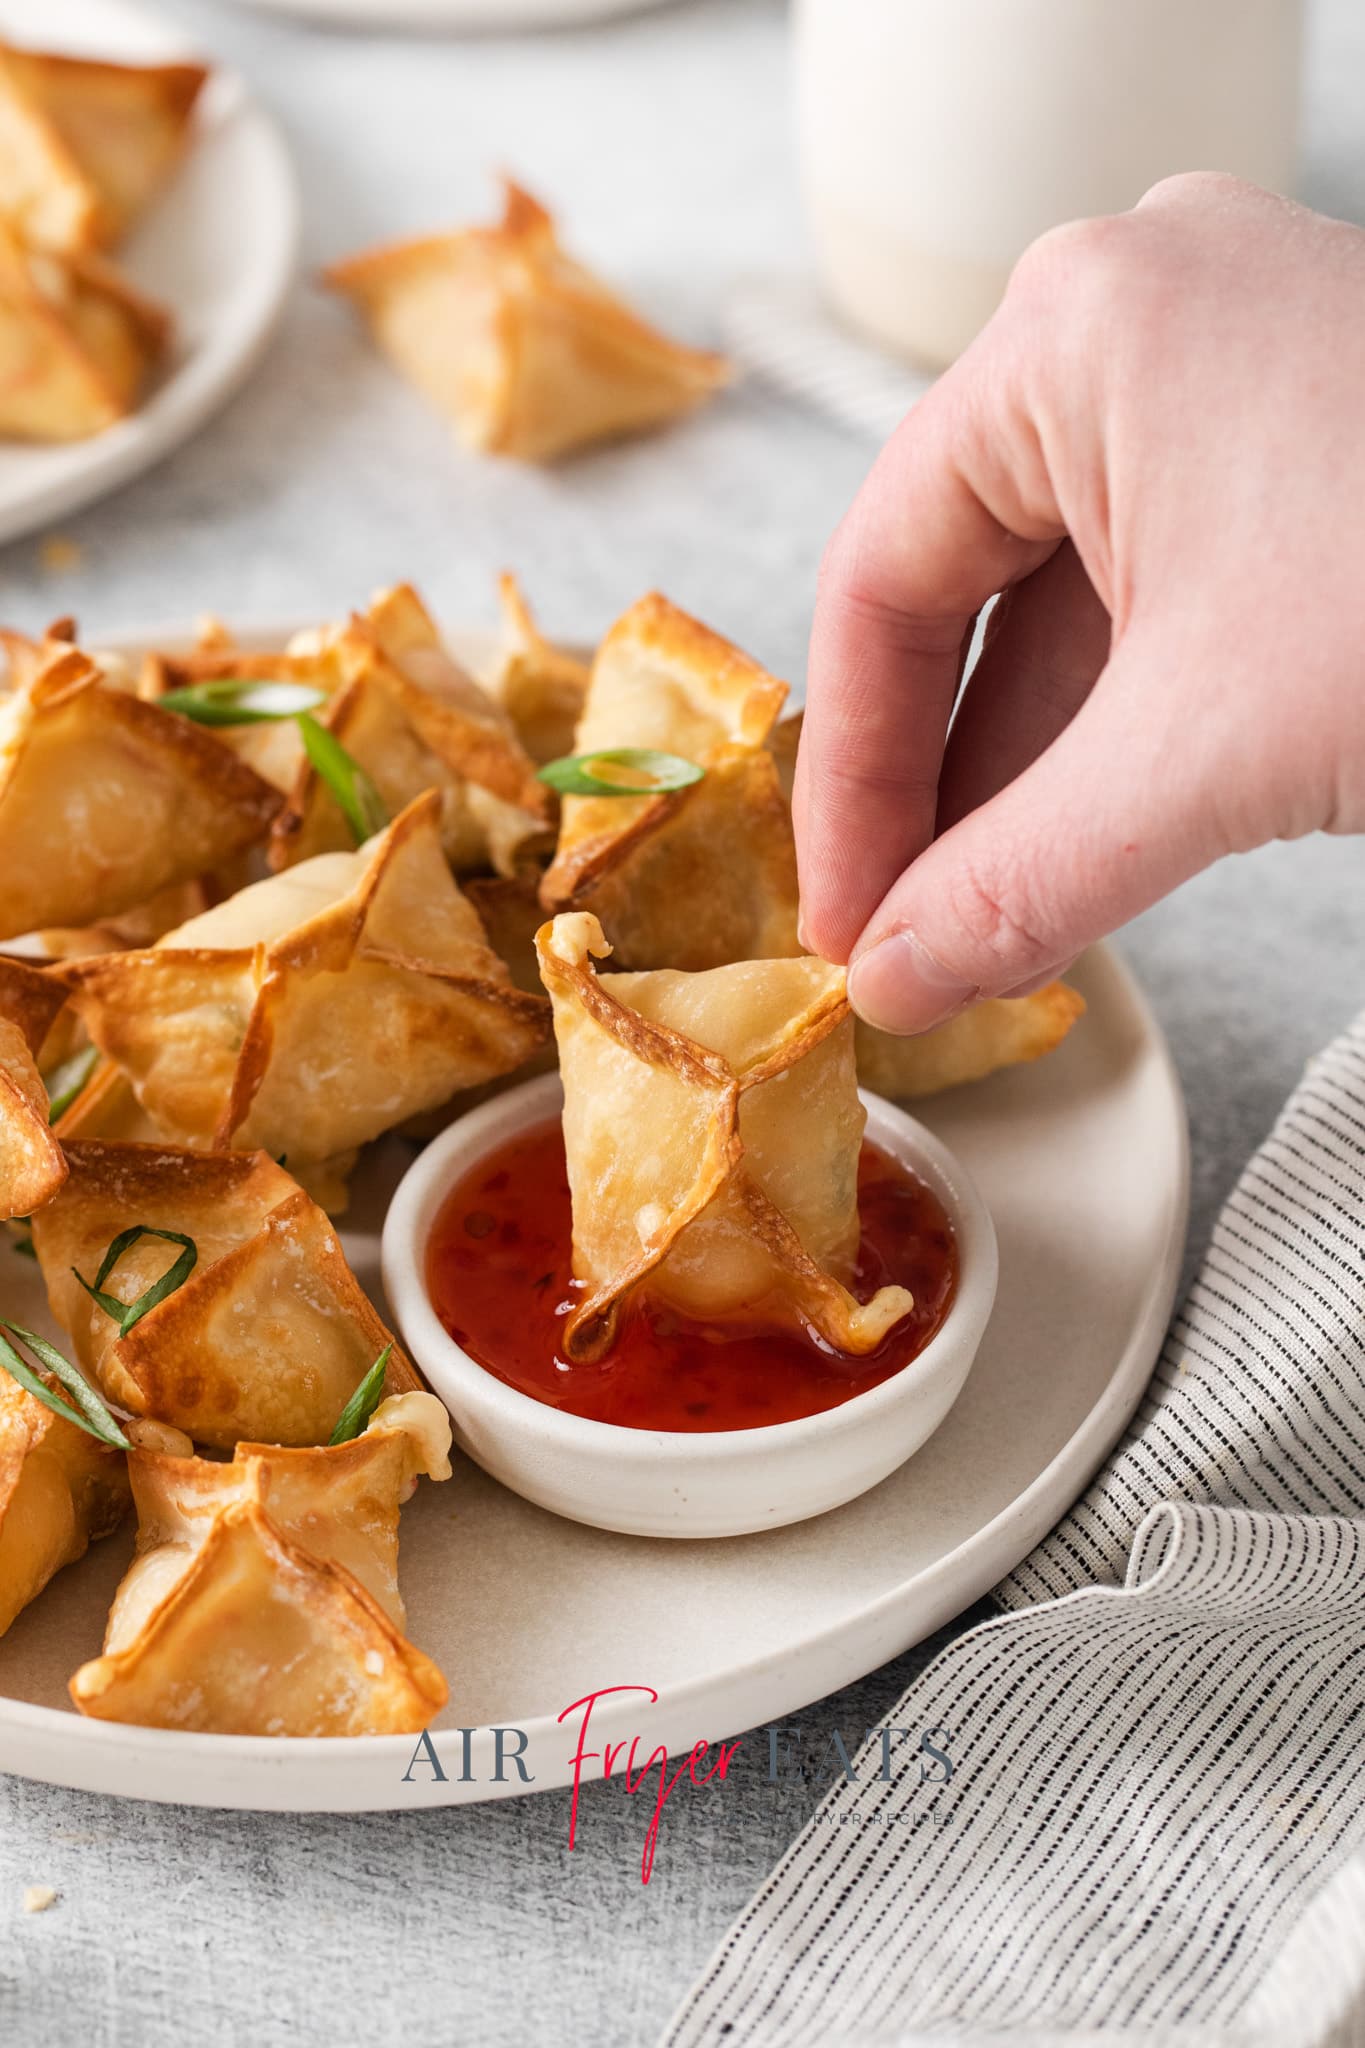 a platter of crab rangoons. A hand is dipping one into sweet and sour sauce.